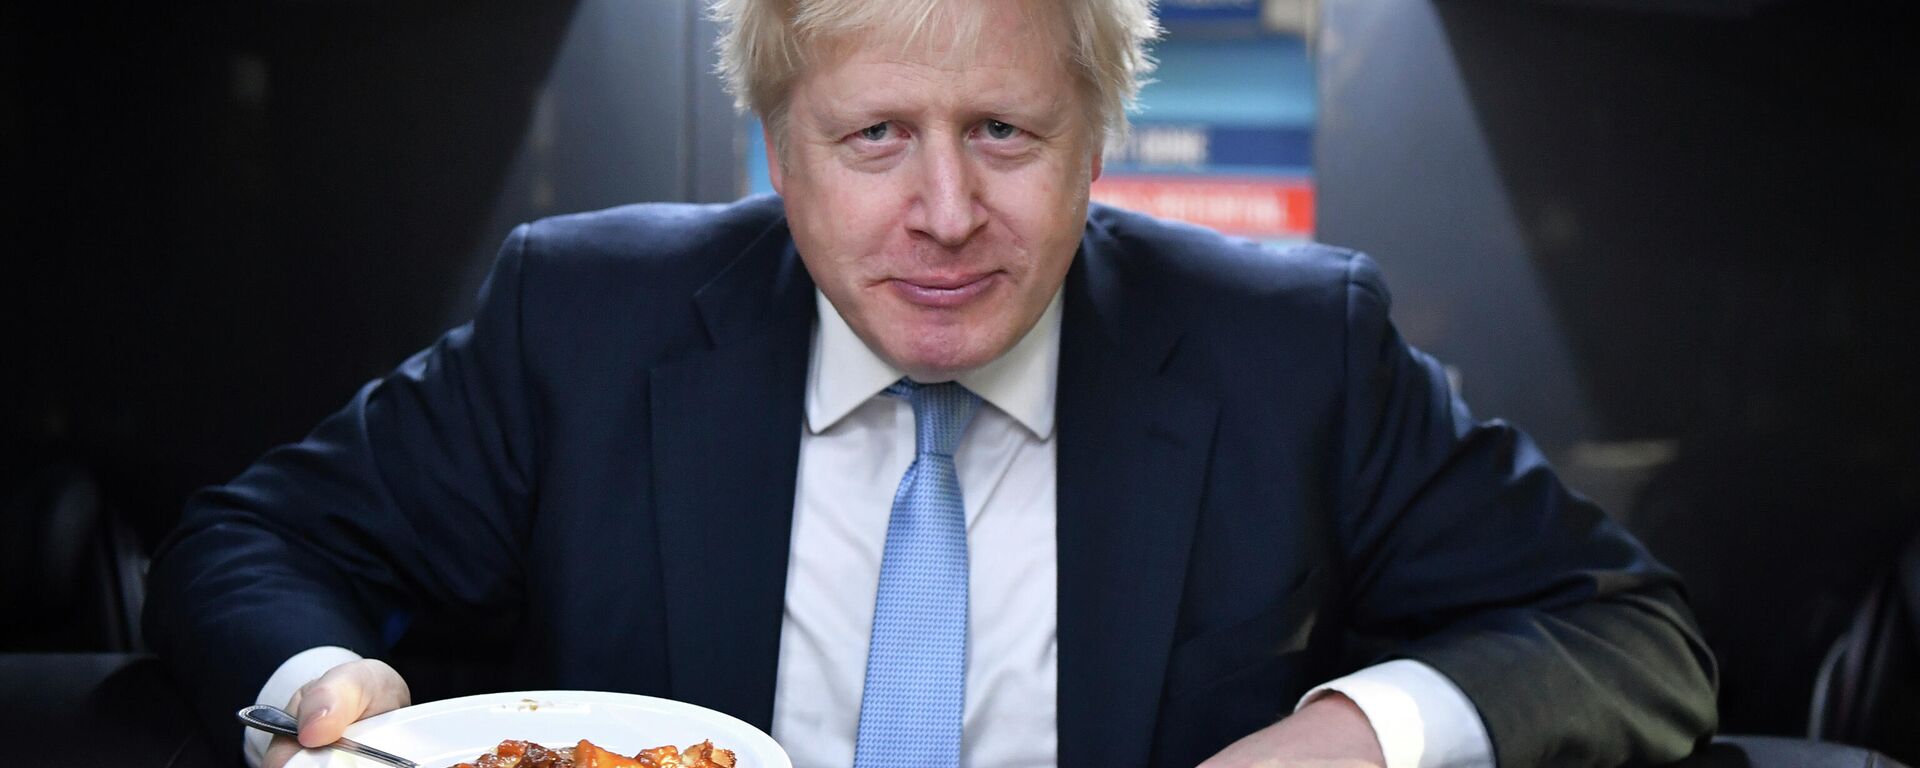 Britain's Prime Minister Boris Johnson eats a portion of pie aboard the Conservative Party campaign bus after a visit to the Red Olive catering company in Derby, central England Wednesday Dec. 11, 2019.  - Sputnik International, 1920, 19.01.2022